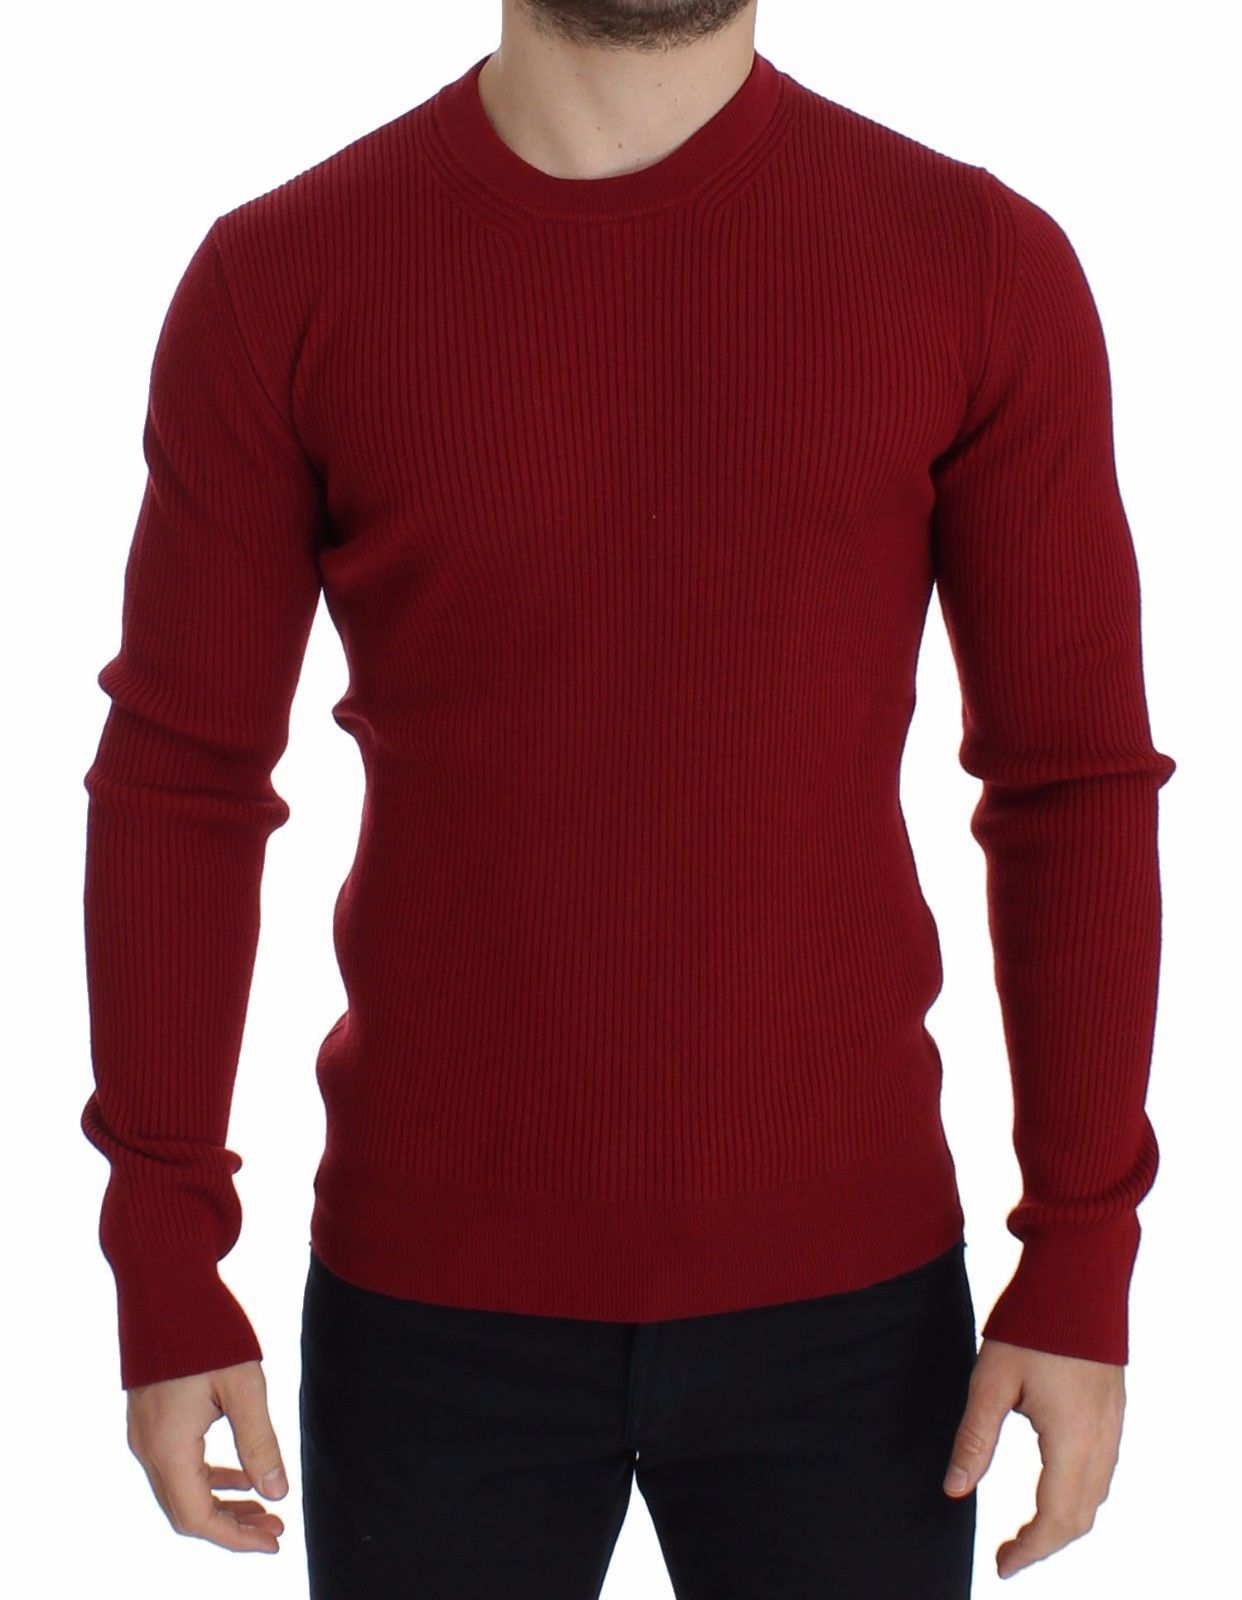 Red Knitted Wool Crewneck Sweater Pullover - Fashion